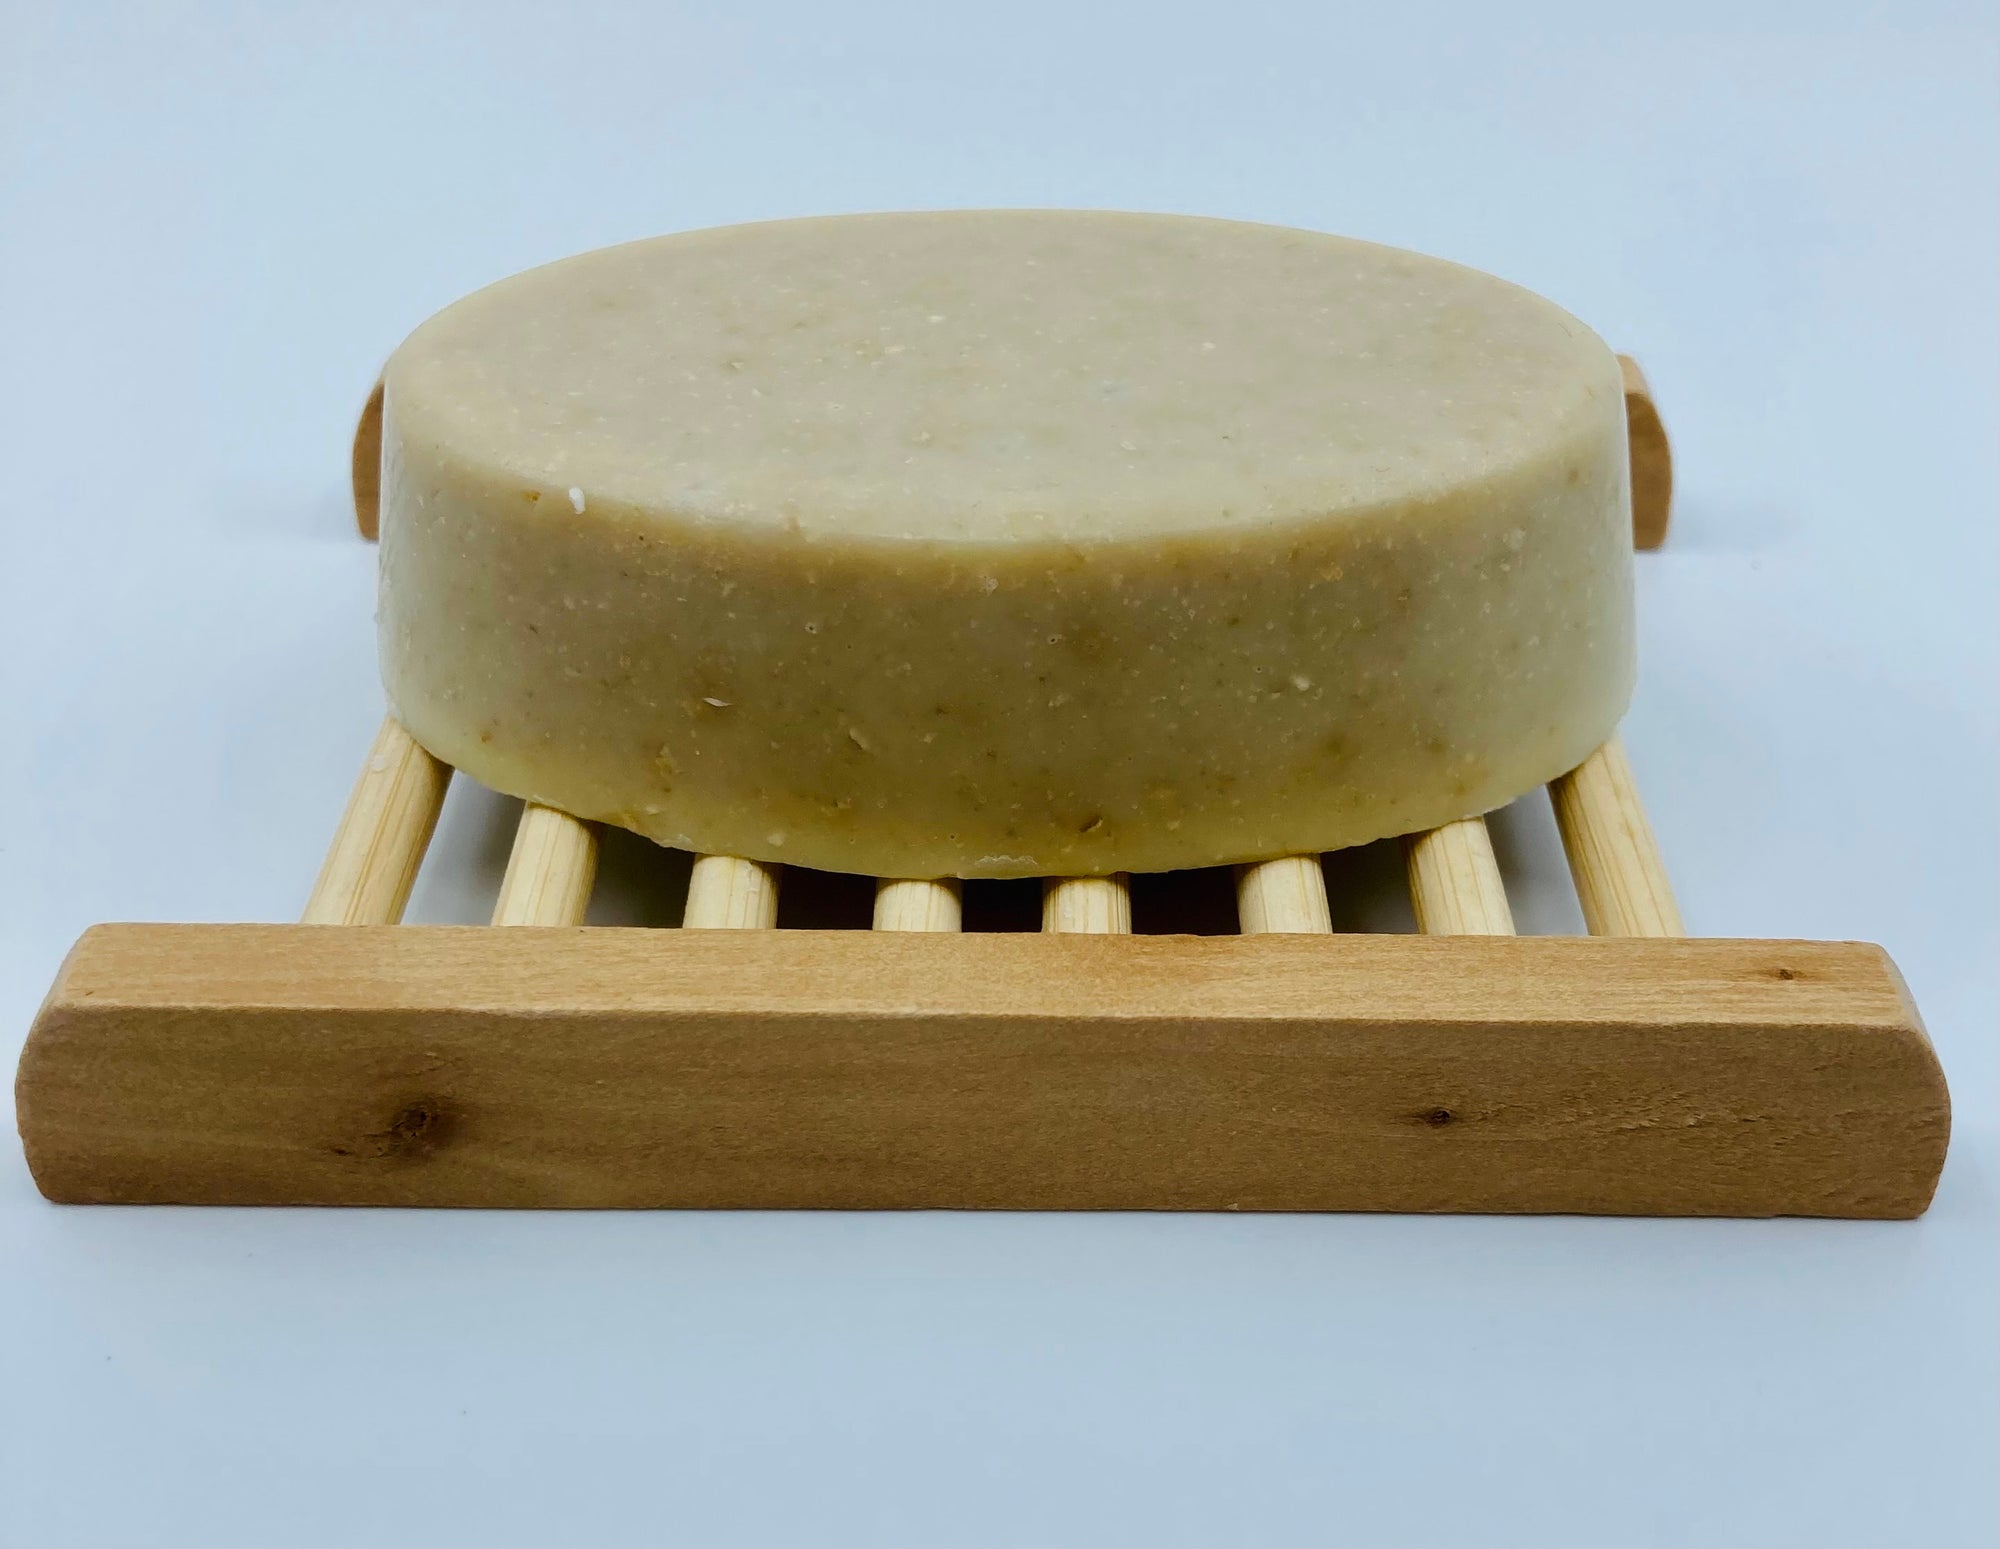 This bamboo soap dish is approximately 4 inches long and 3 inches wide.  It is made from 100% natural bamboo.  Please note that since bamboo is a natural resource, there may be color variations.